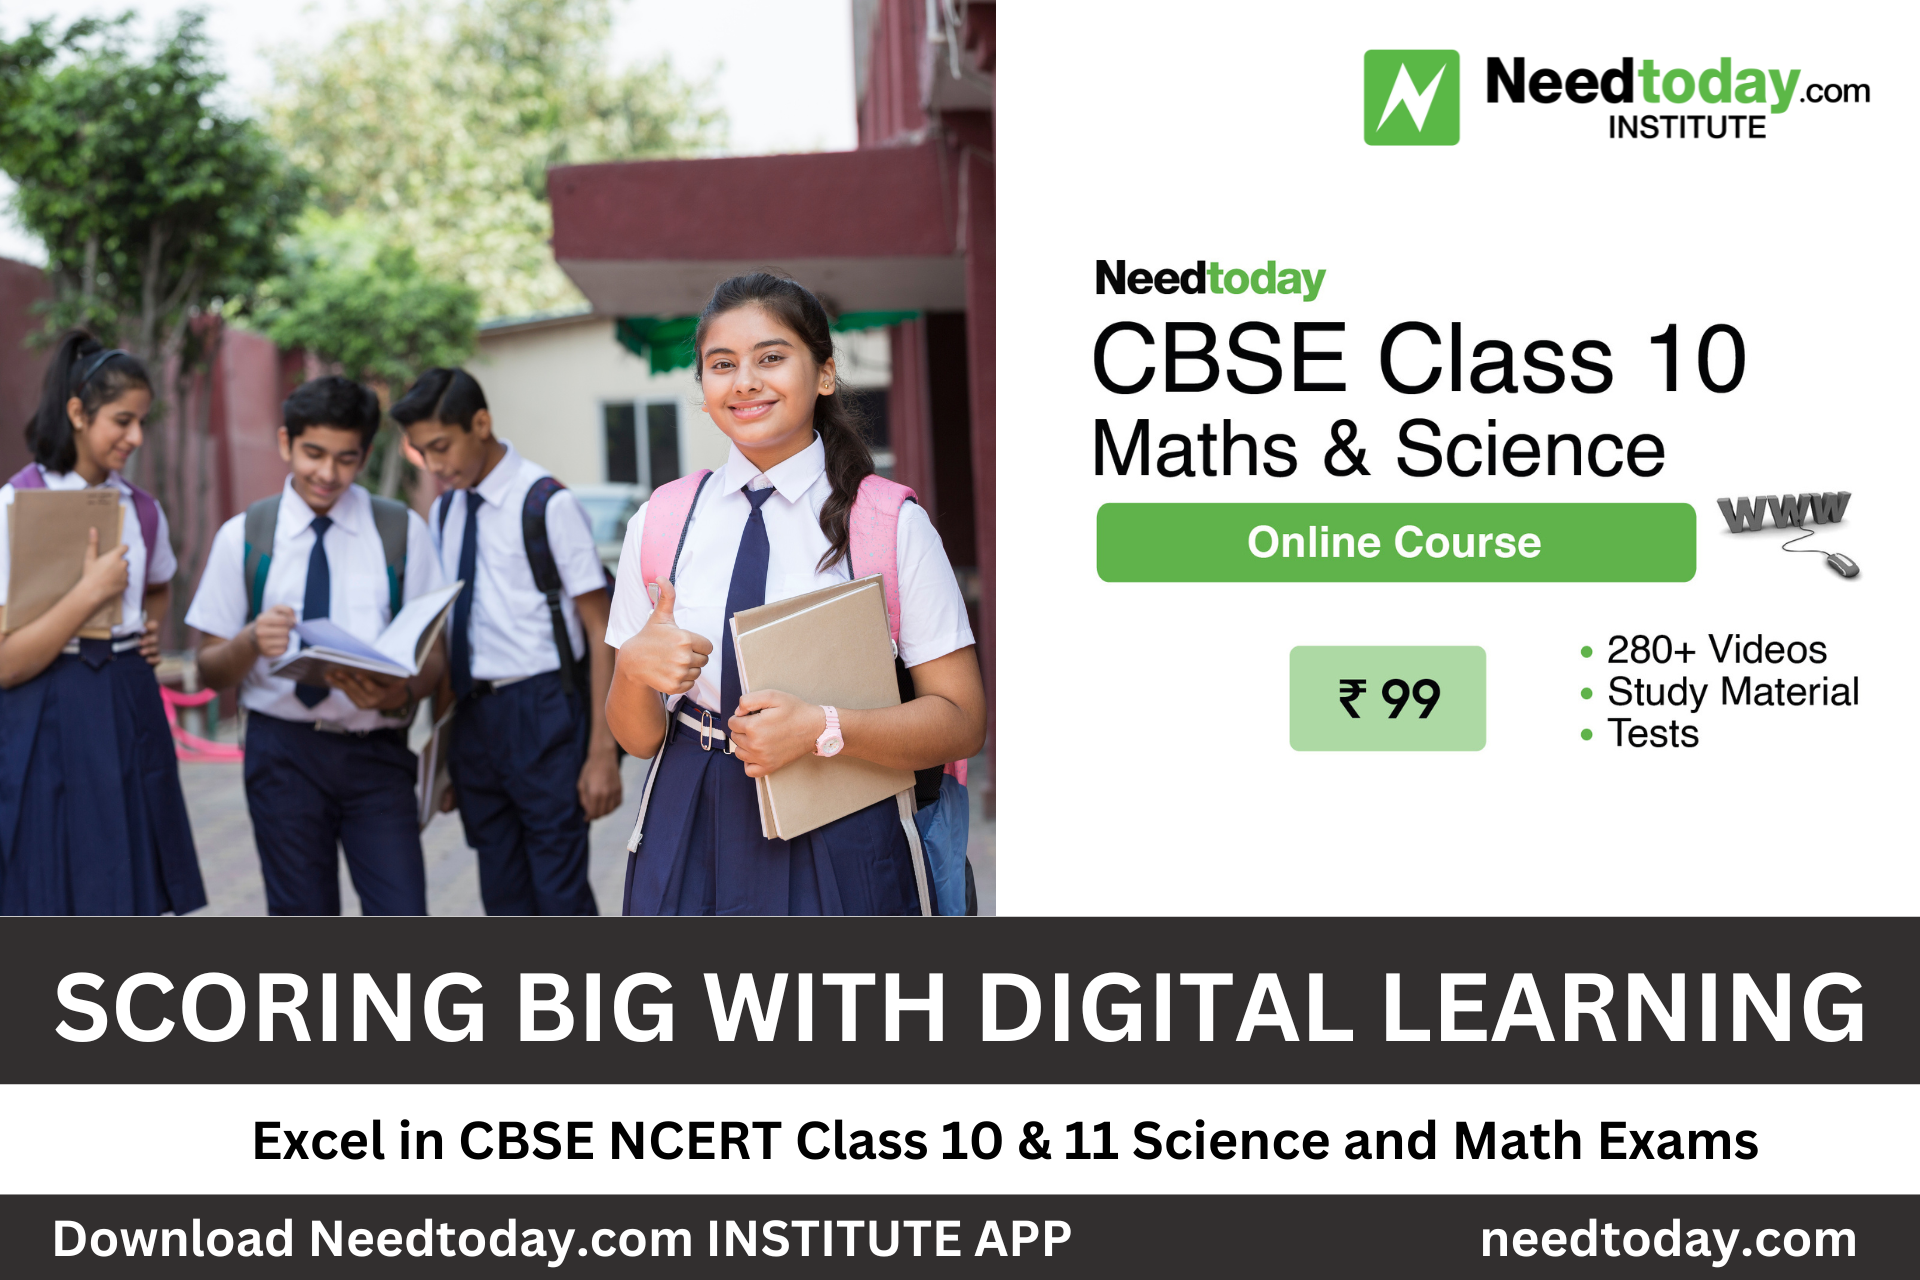 Scoring Big with Digital Learning: Excel in CBSE NCERT Class 10 & 11 Science and Math Exams